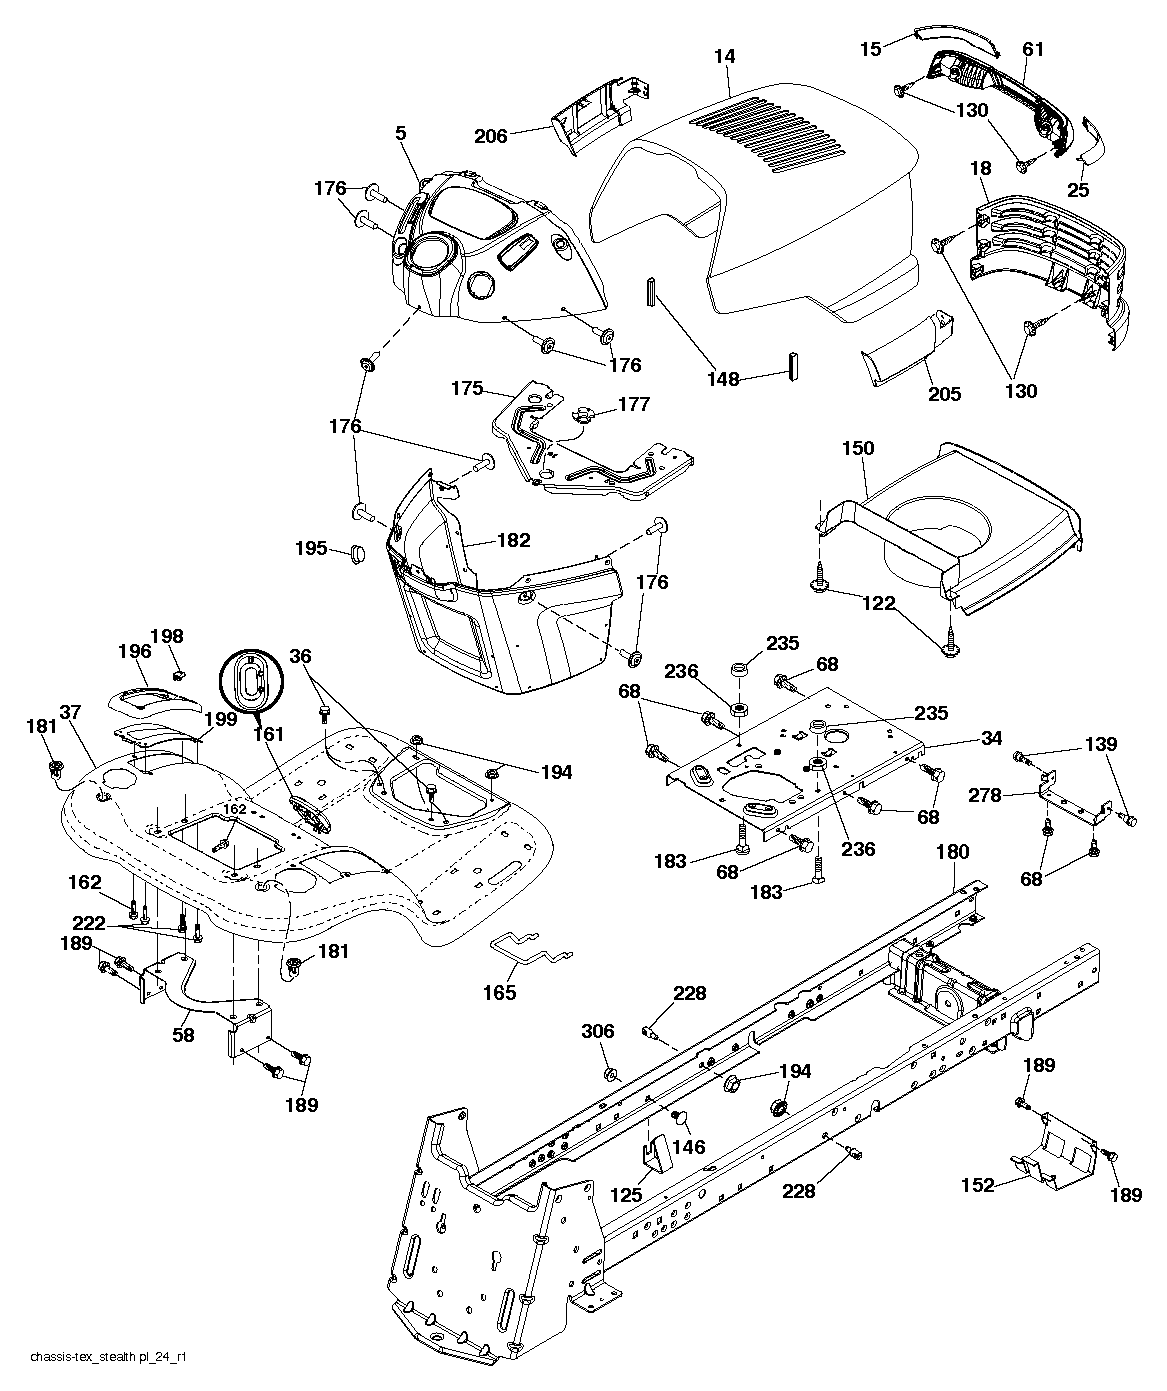 Chassis and appendix 586398601, 586414601, 532182885, 532187114, 532161842, 580910801, 596030701, 532443816, 532194314, 532179763, 596030701, 532192512, 581684801, 596321701, 532171873, 581857901, 532164655, 532190308, 531169901, 532411879, 532142432, 532196826, 532193236, 532400776, 532195228, 582033001, 532404796, 532192551, 874520520, 532428867, 583612701, 532404137, 532411878, 532441552, 532196377, 532187111, 532187112, 532137729, 593824001, 532406129, 873930500, 532196394, 532409149, 532400944